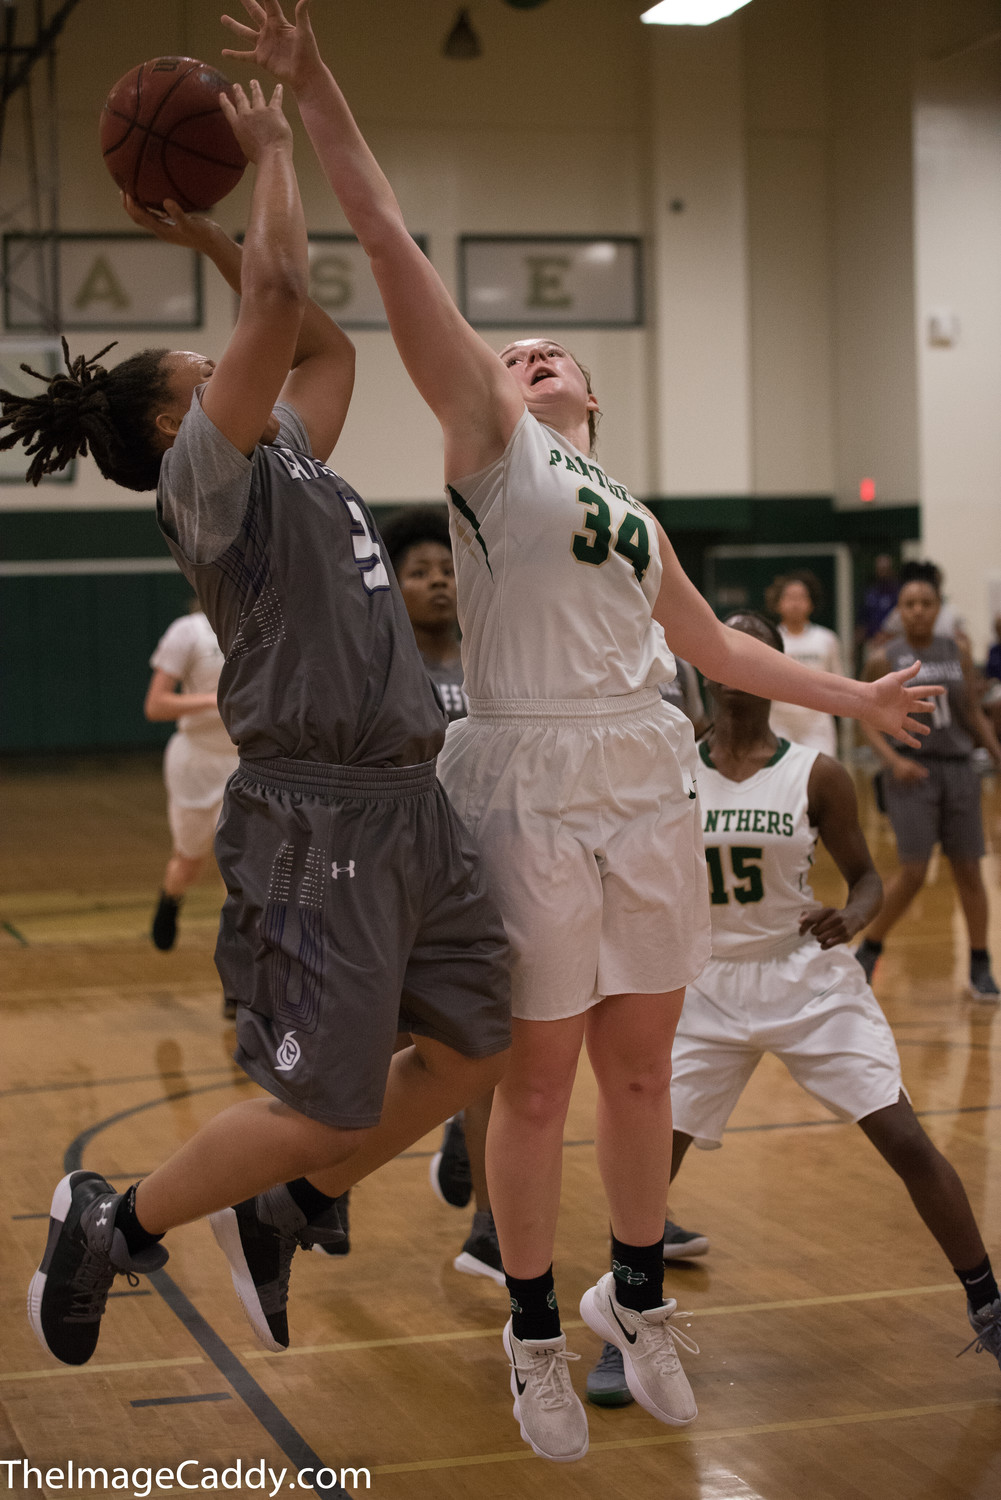 Nease’s Mykah Eshbough attempts to block a shot by Gainesville’s Madison Johnson during the Region 1-7A semifinals. Eshbough had 12 points and 12 rebounds in the win.